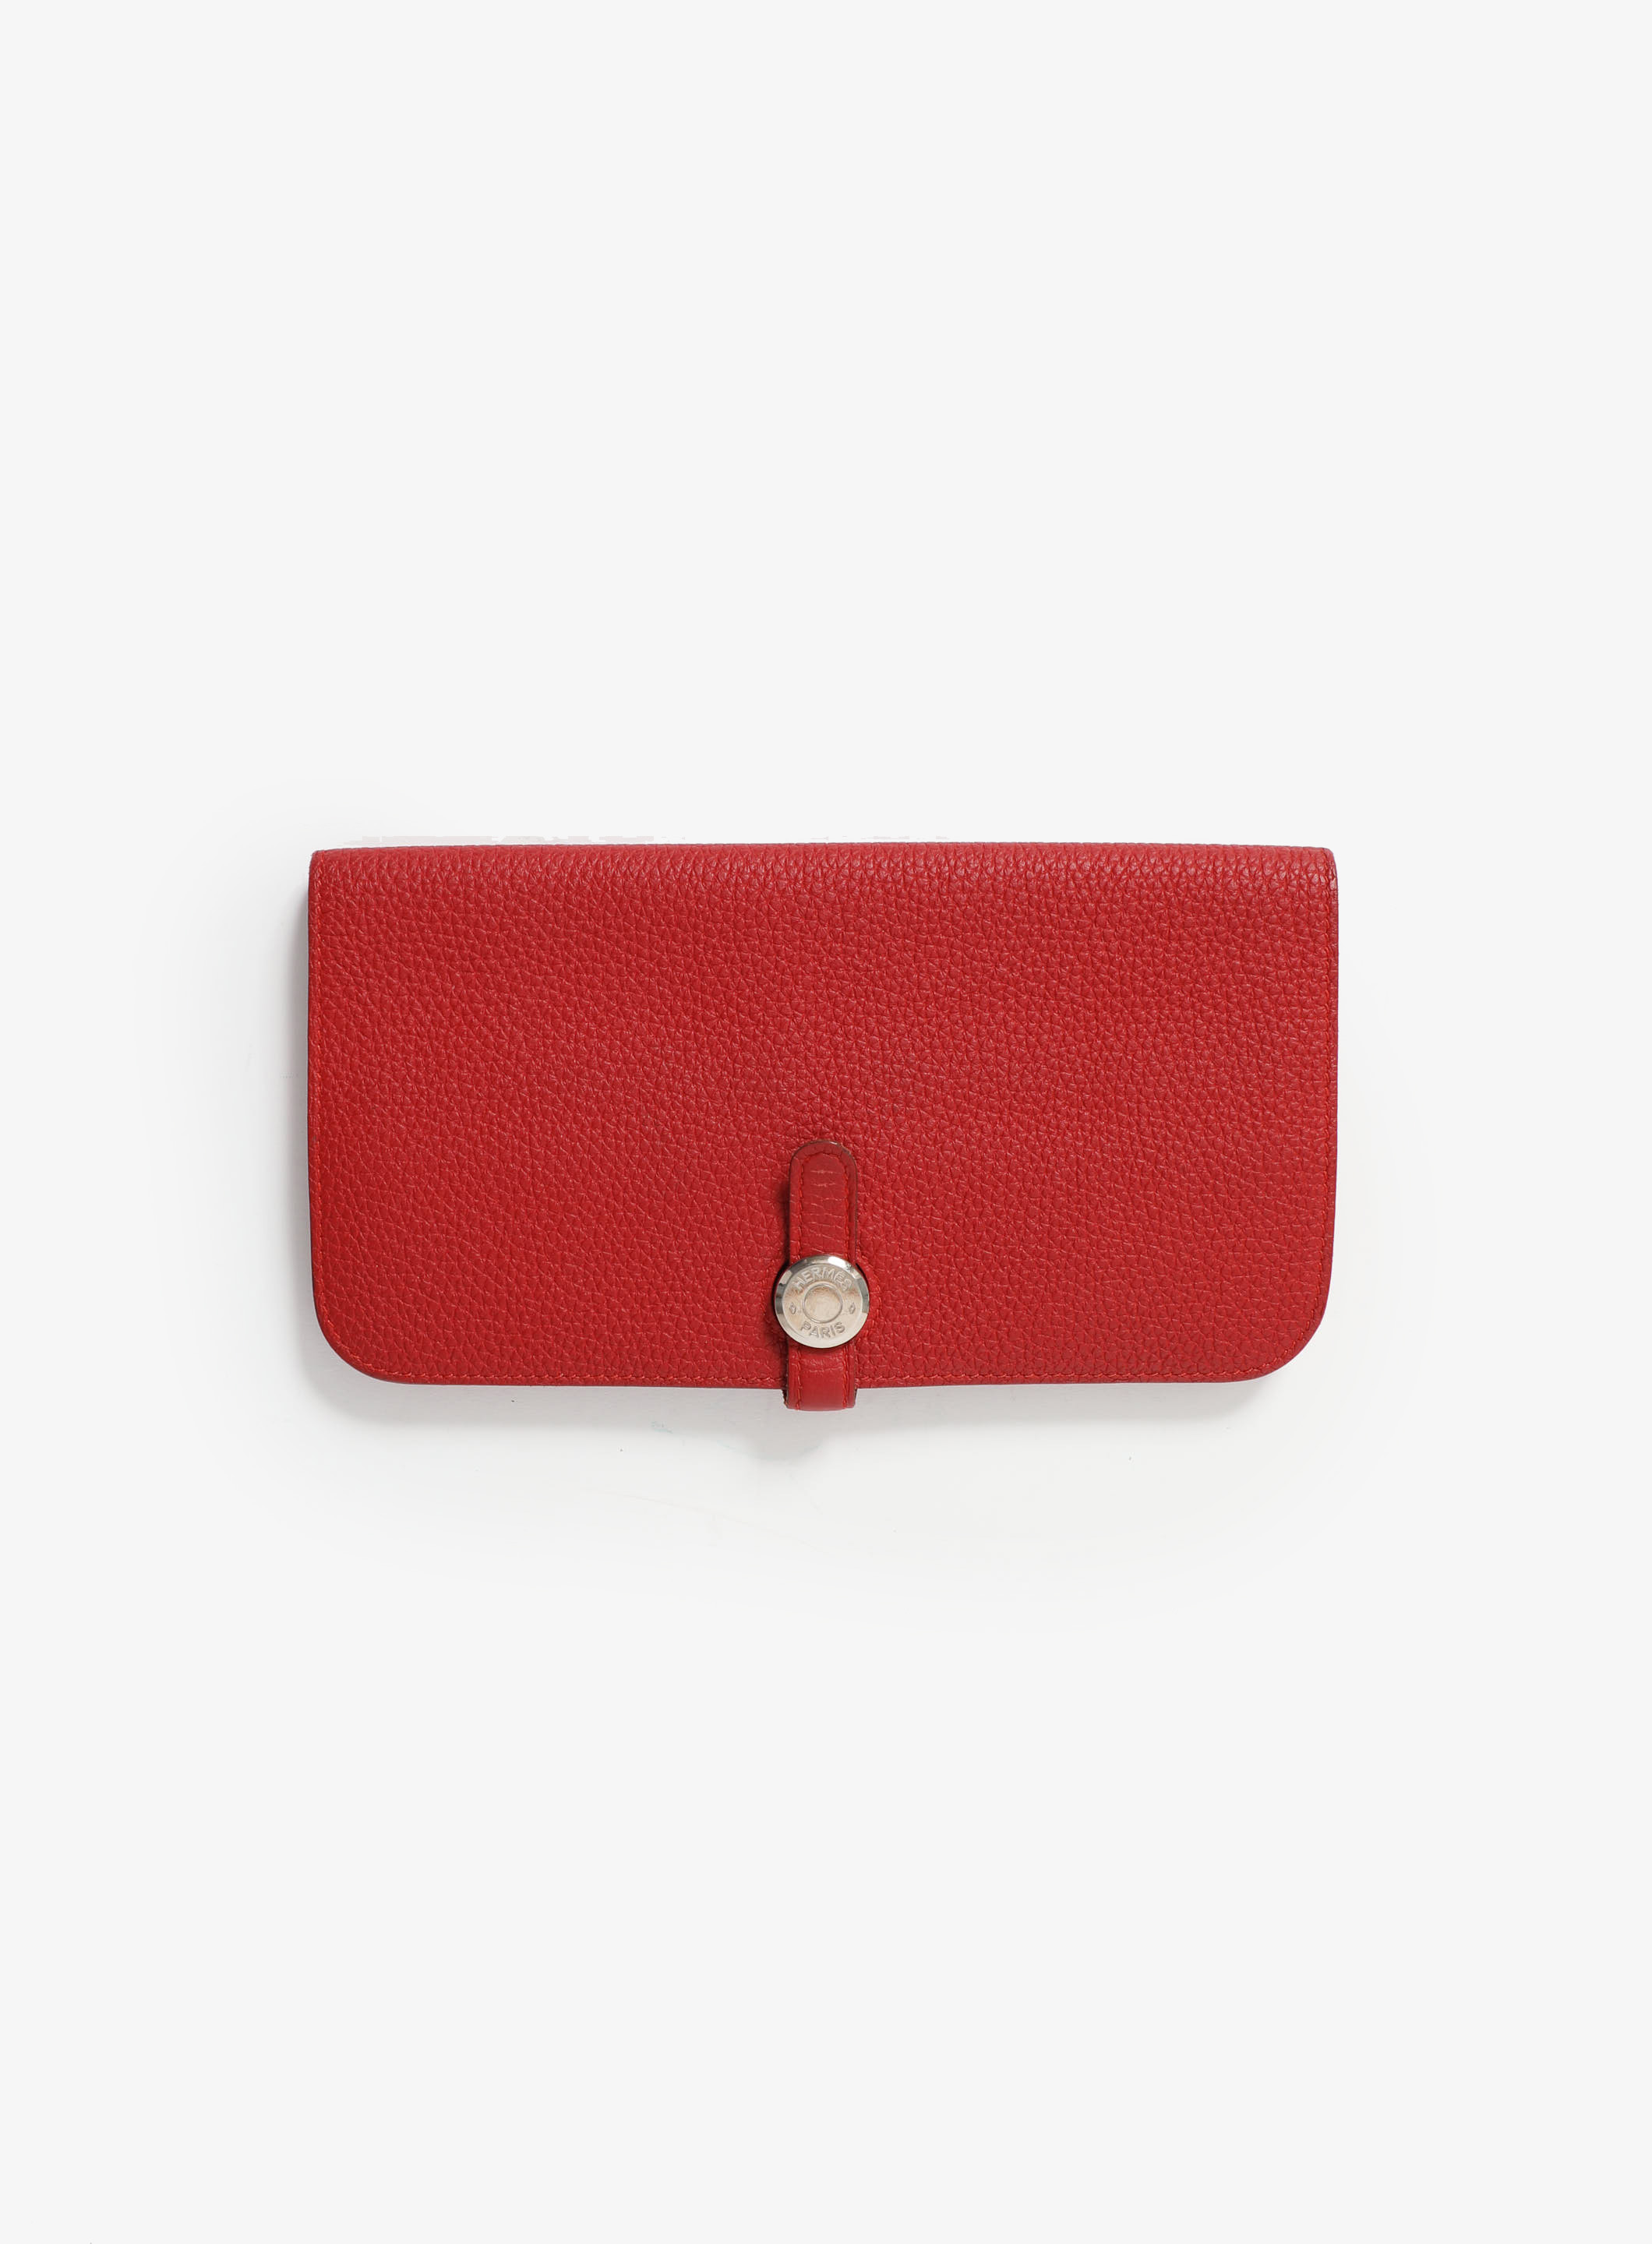 HERMES Logo Dogon Compact Bifold Wallet Purse Togo Leather Red